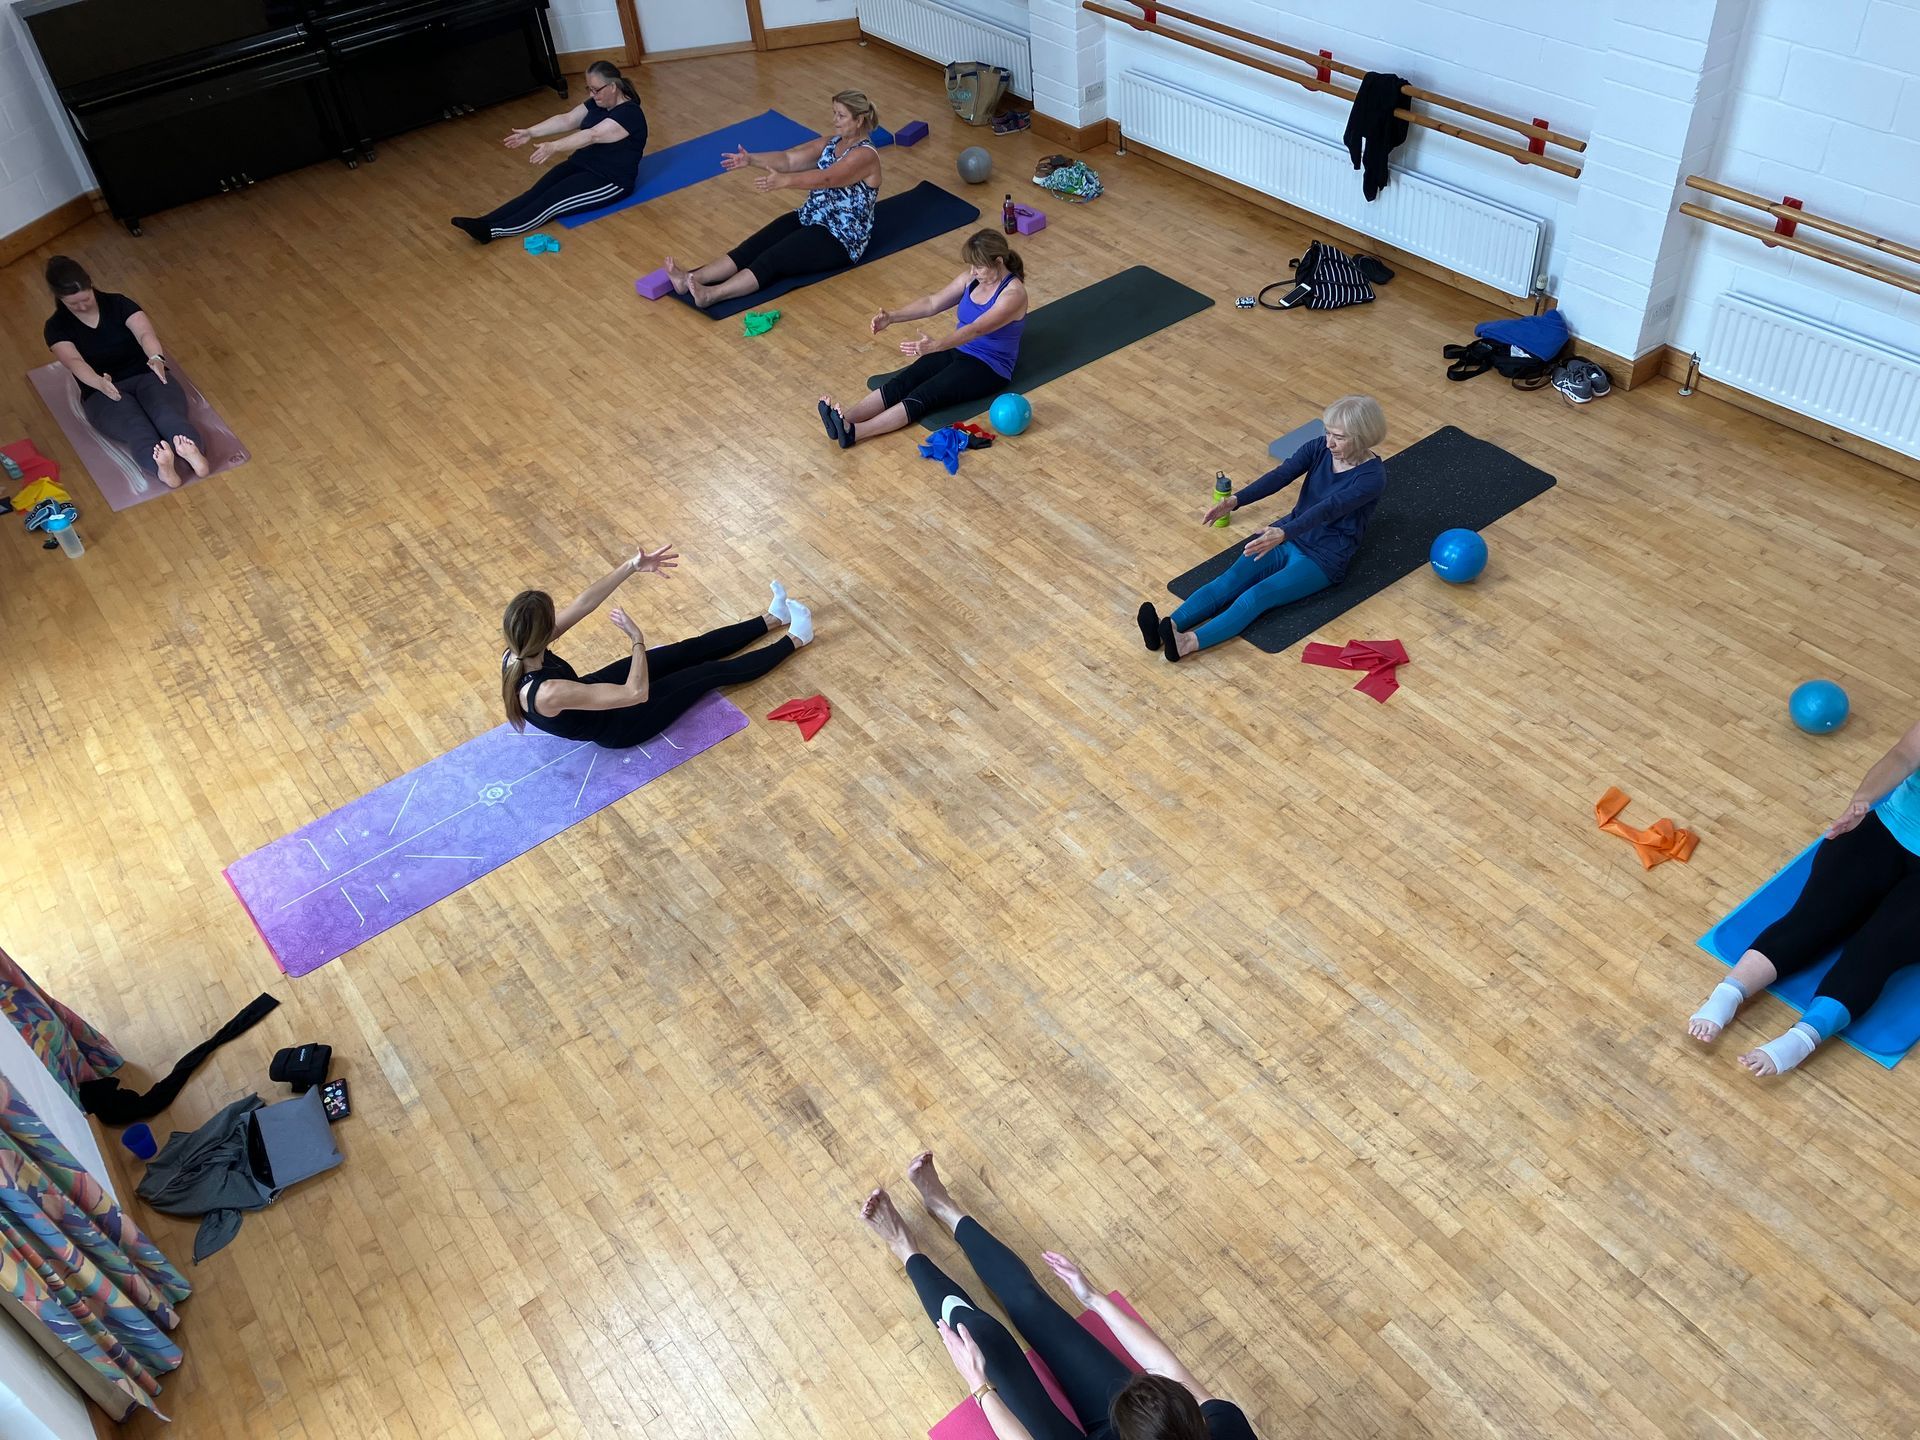 Group Mat Pilates class focusing on improving posture, strength, and well-being